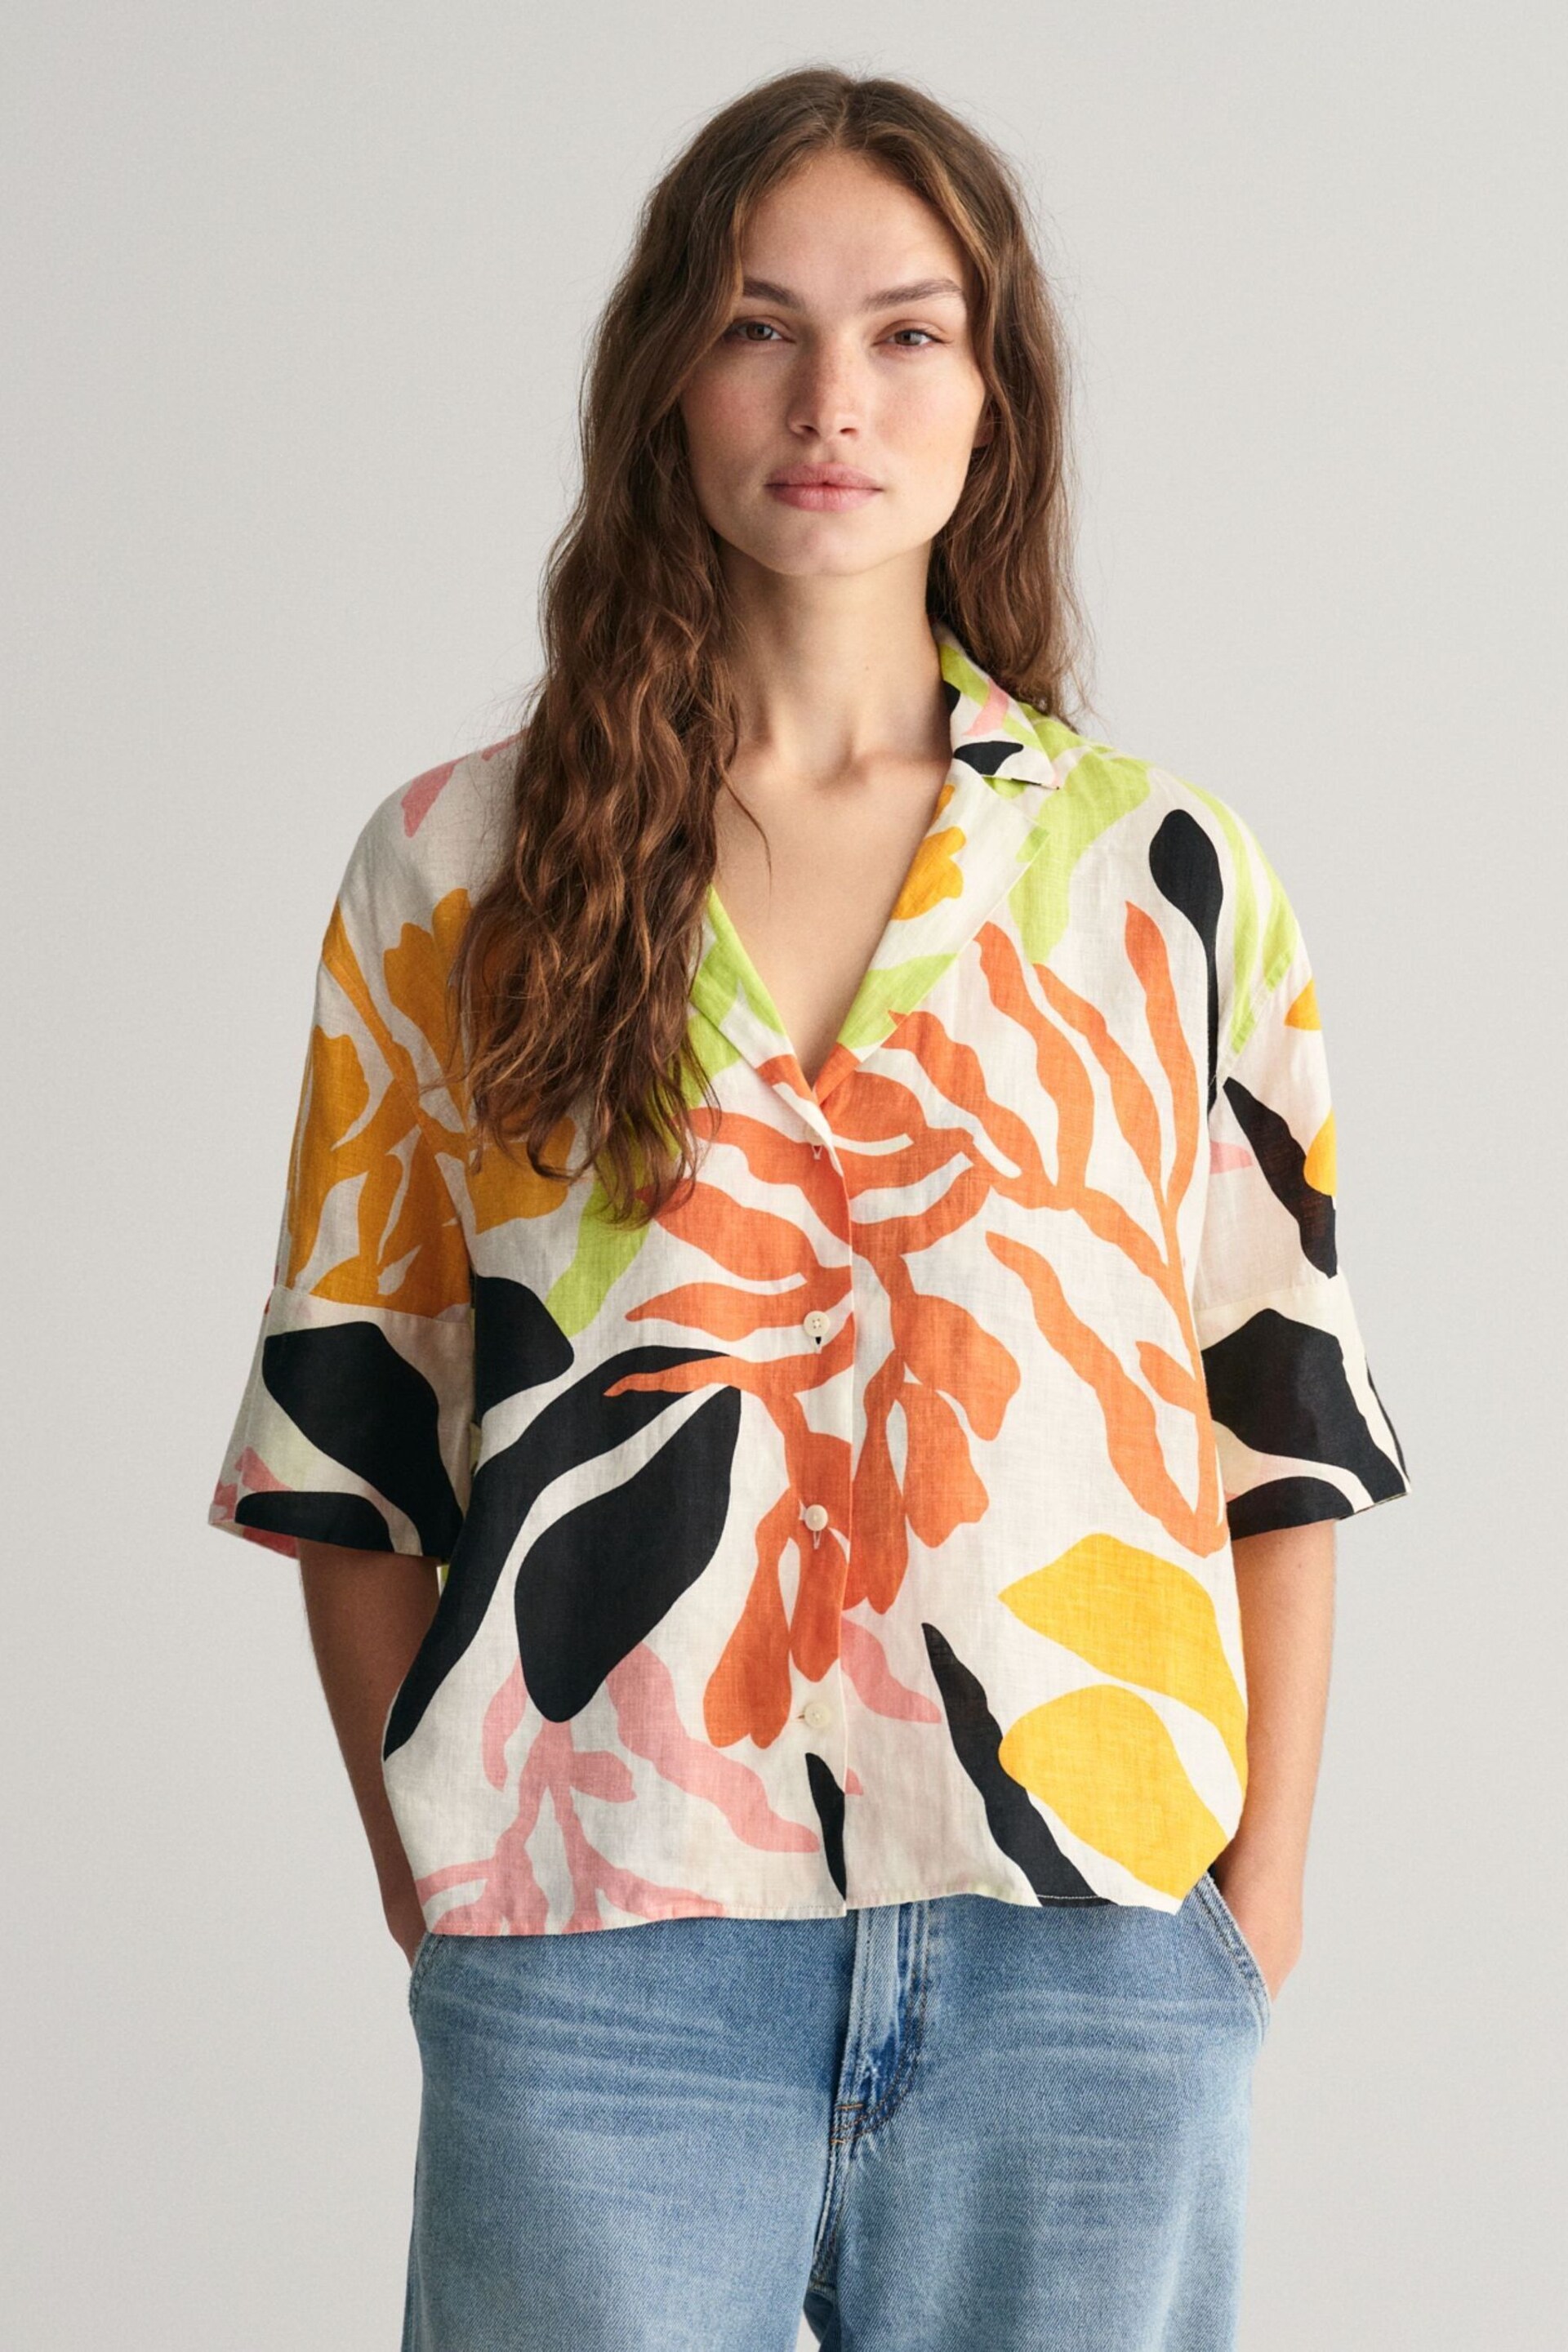 GANT Yellow Relaxed Fit Palm Print Linen Short Sleeve Shirt - Image 1 of 7